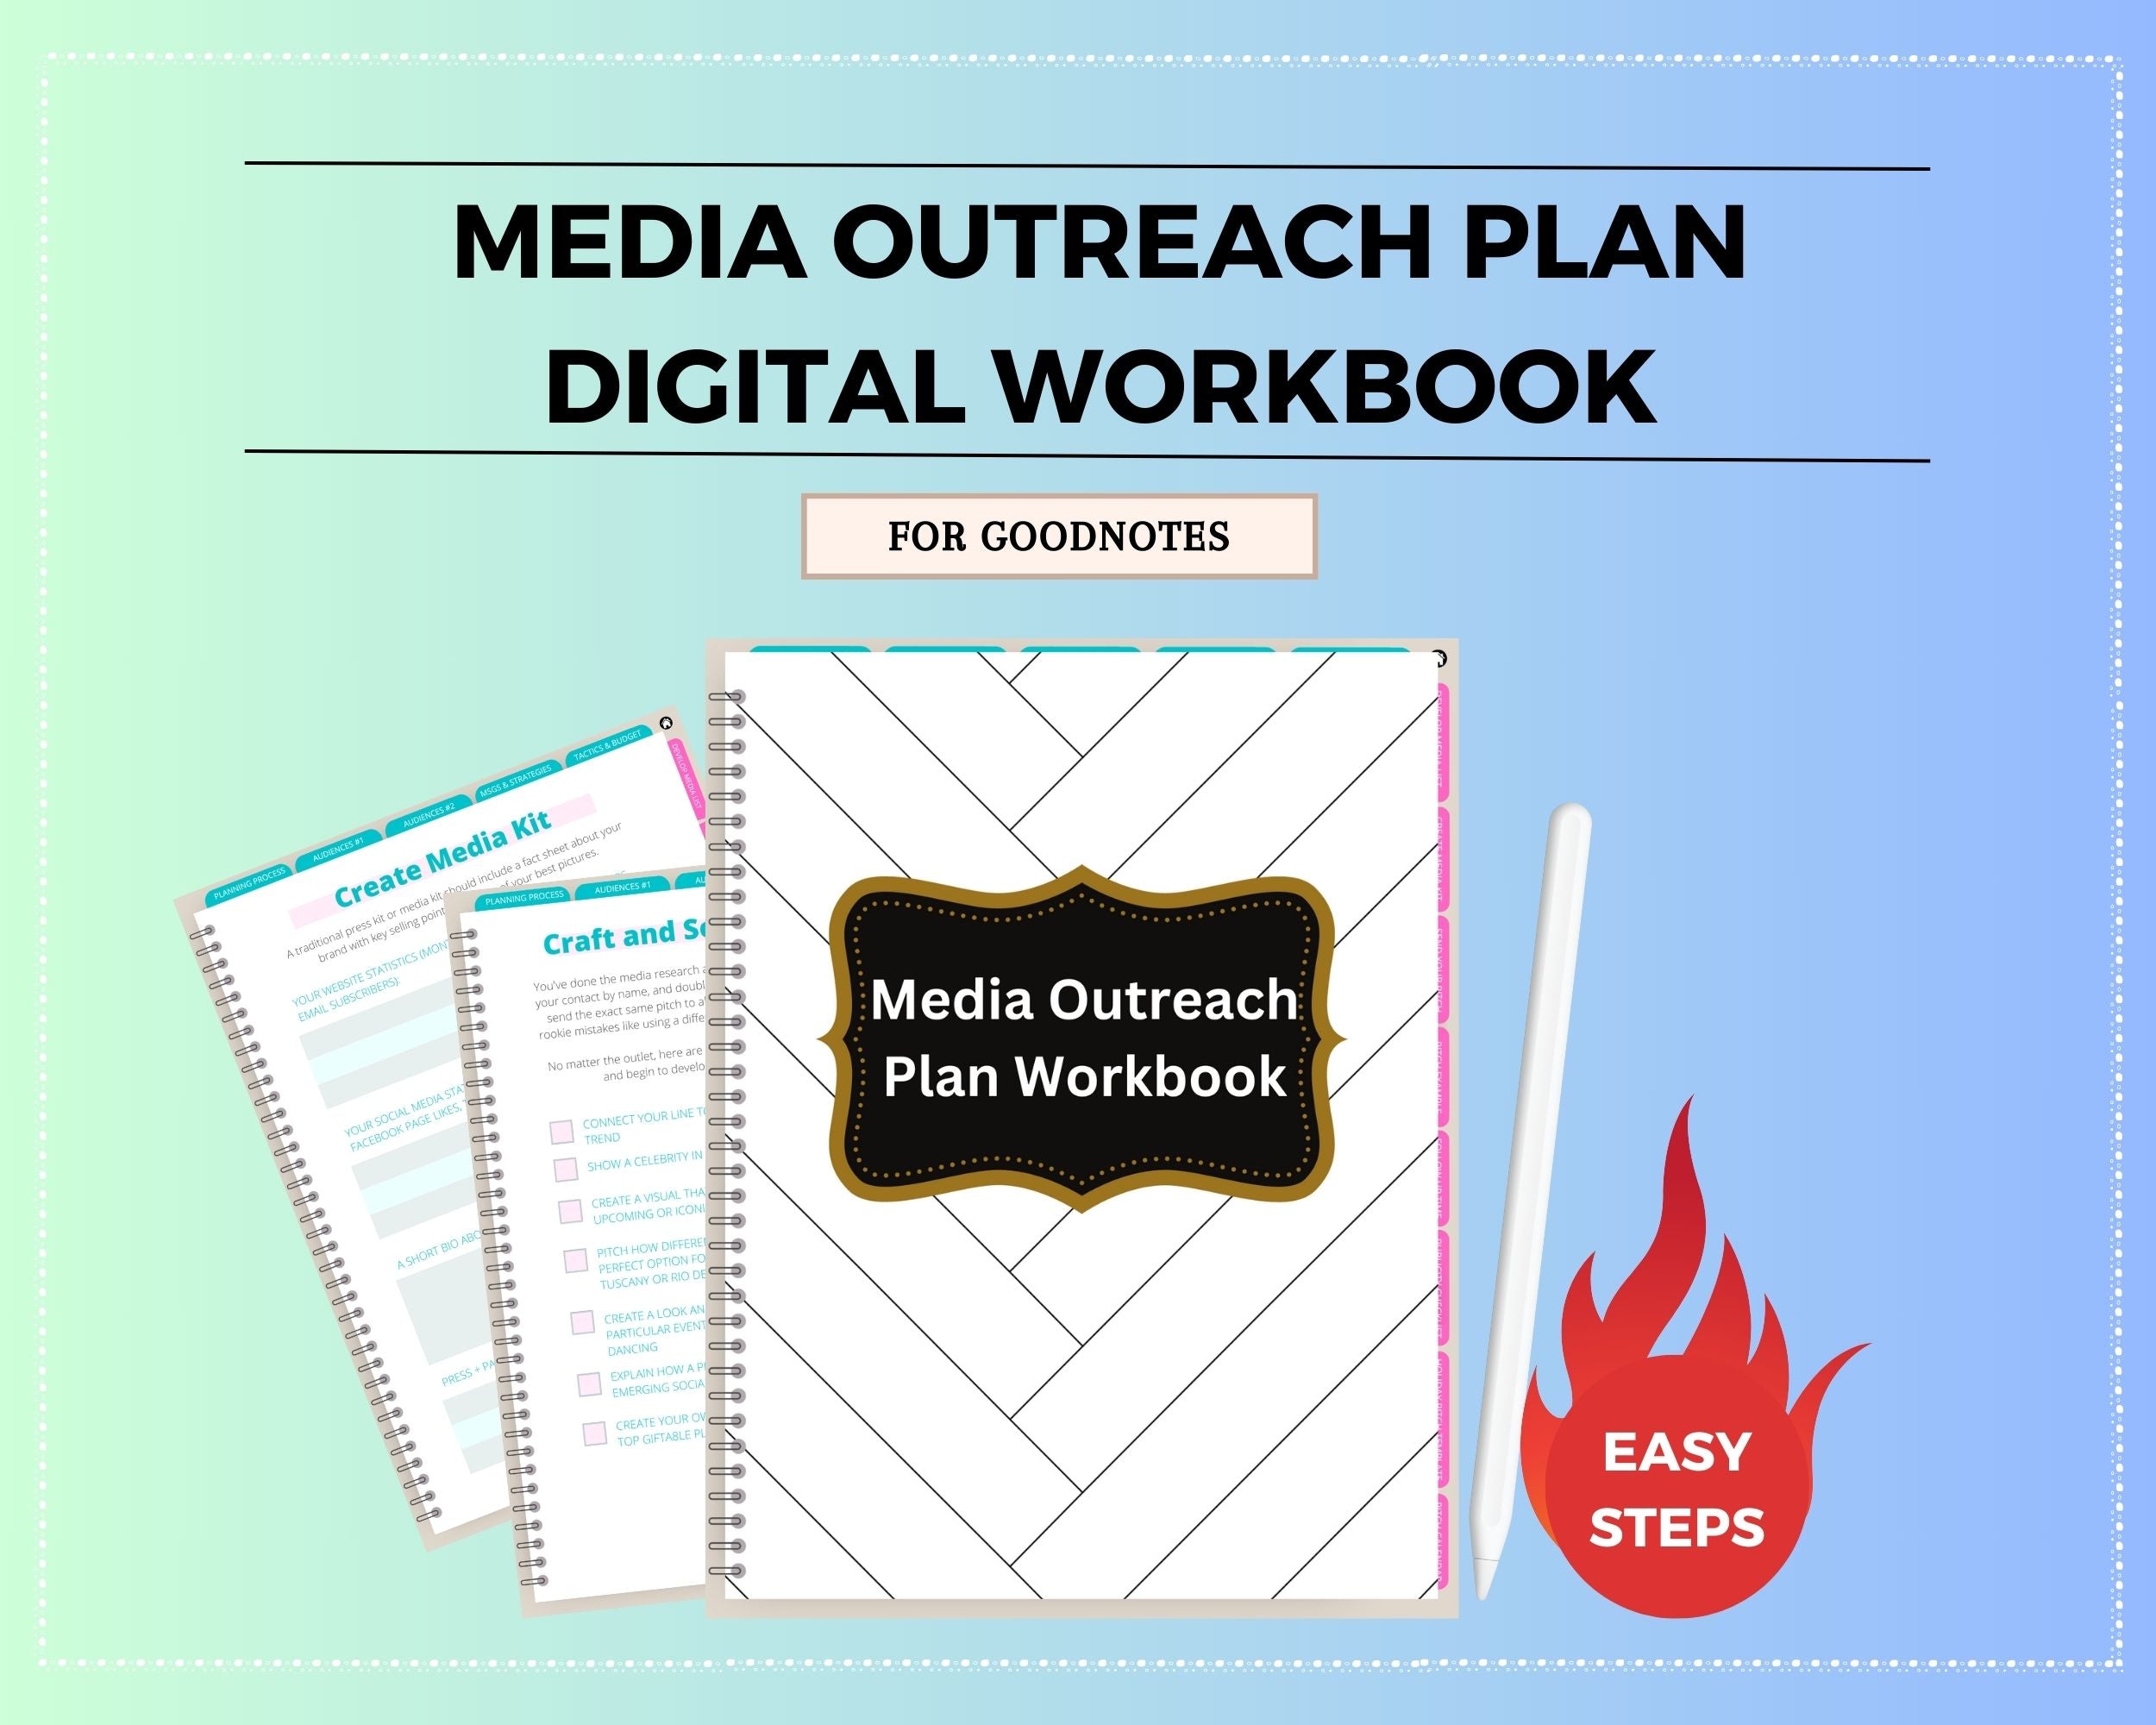 Media Outreach Plan Digital Workbook | Hyperlinked PDF | Suitable with Goodness & Notability